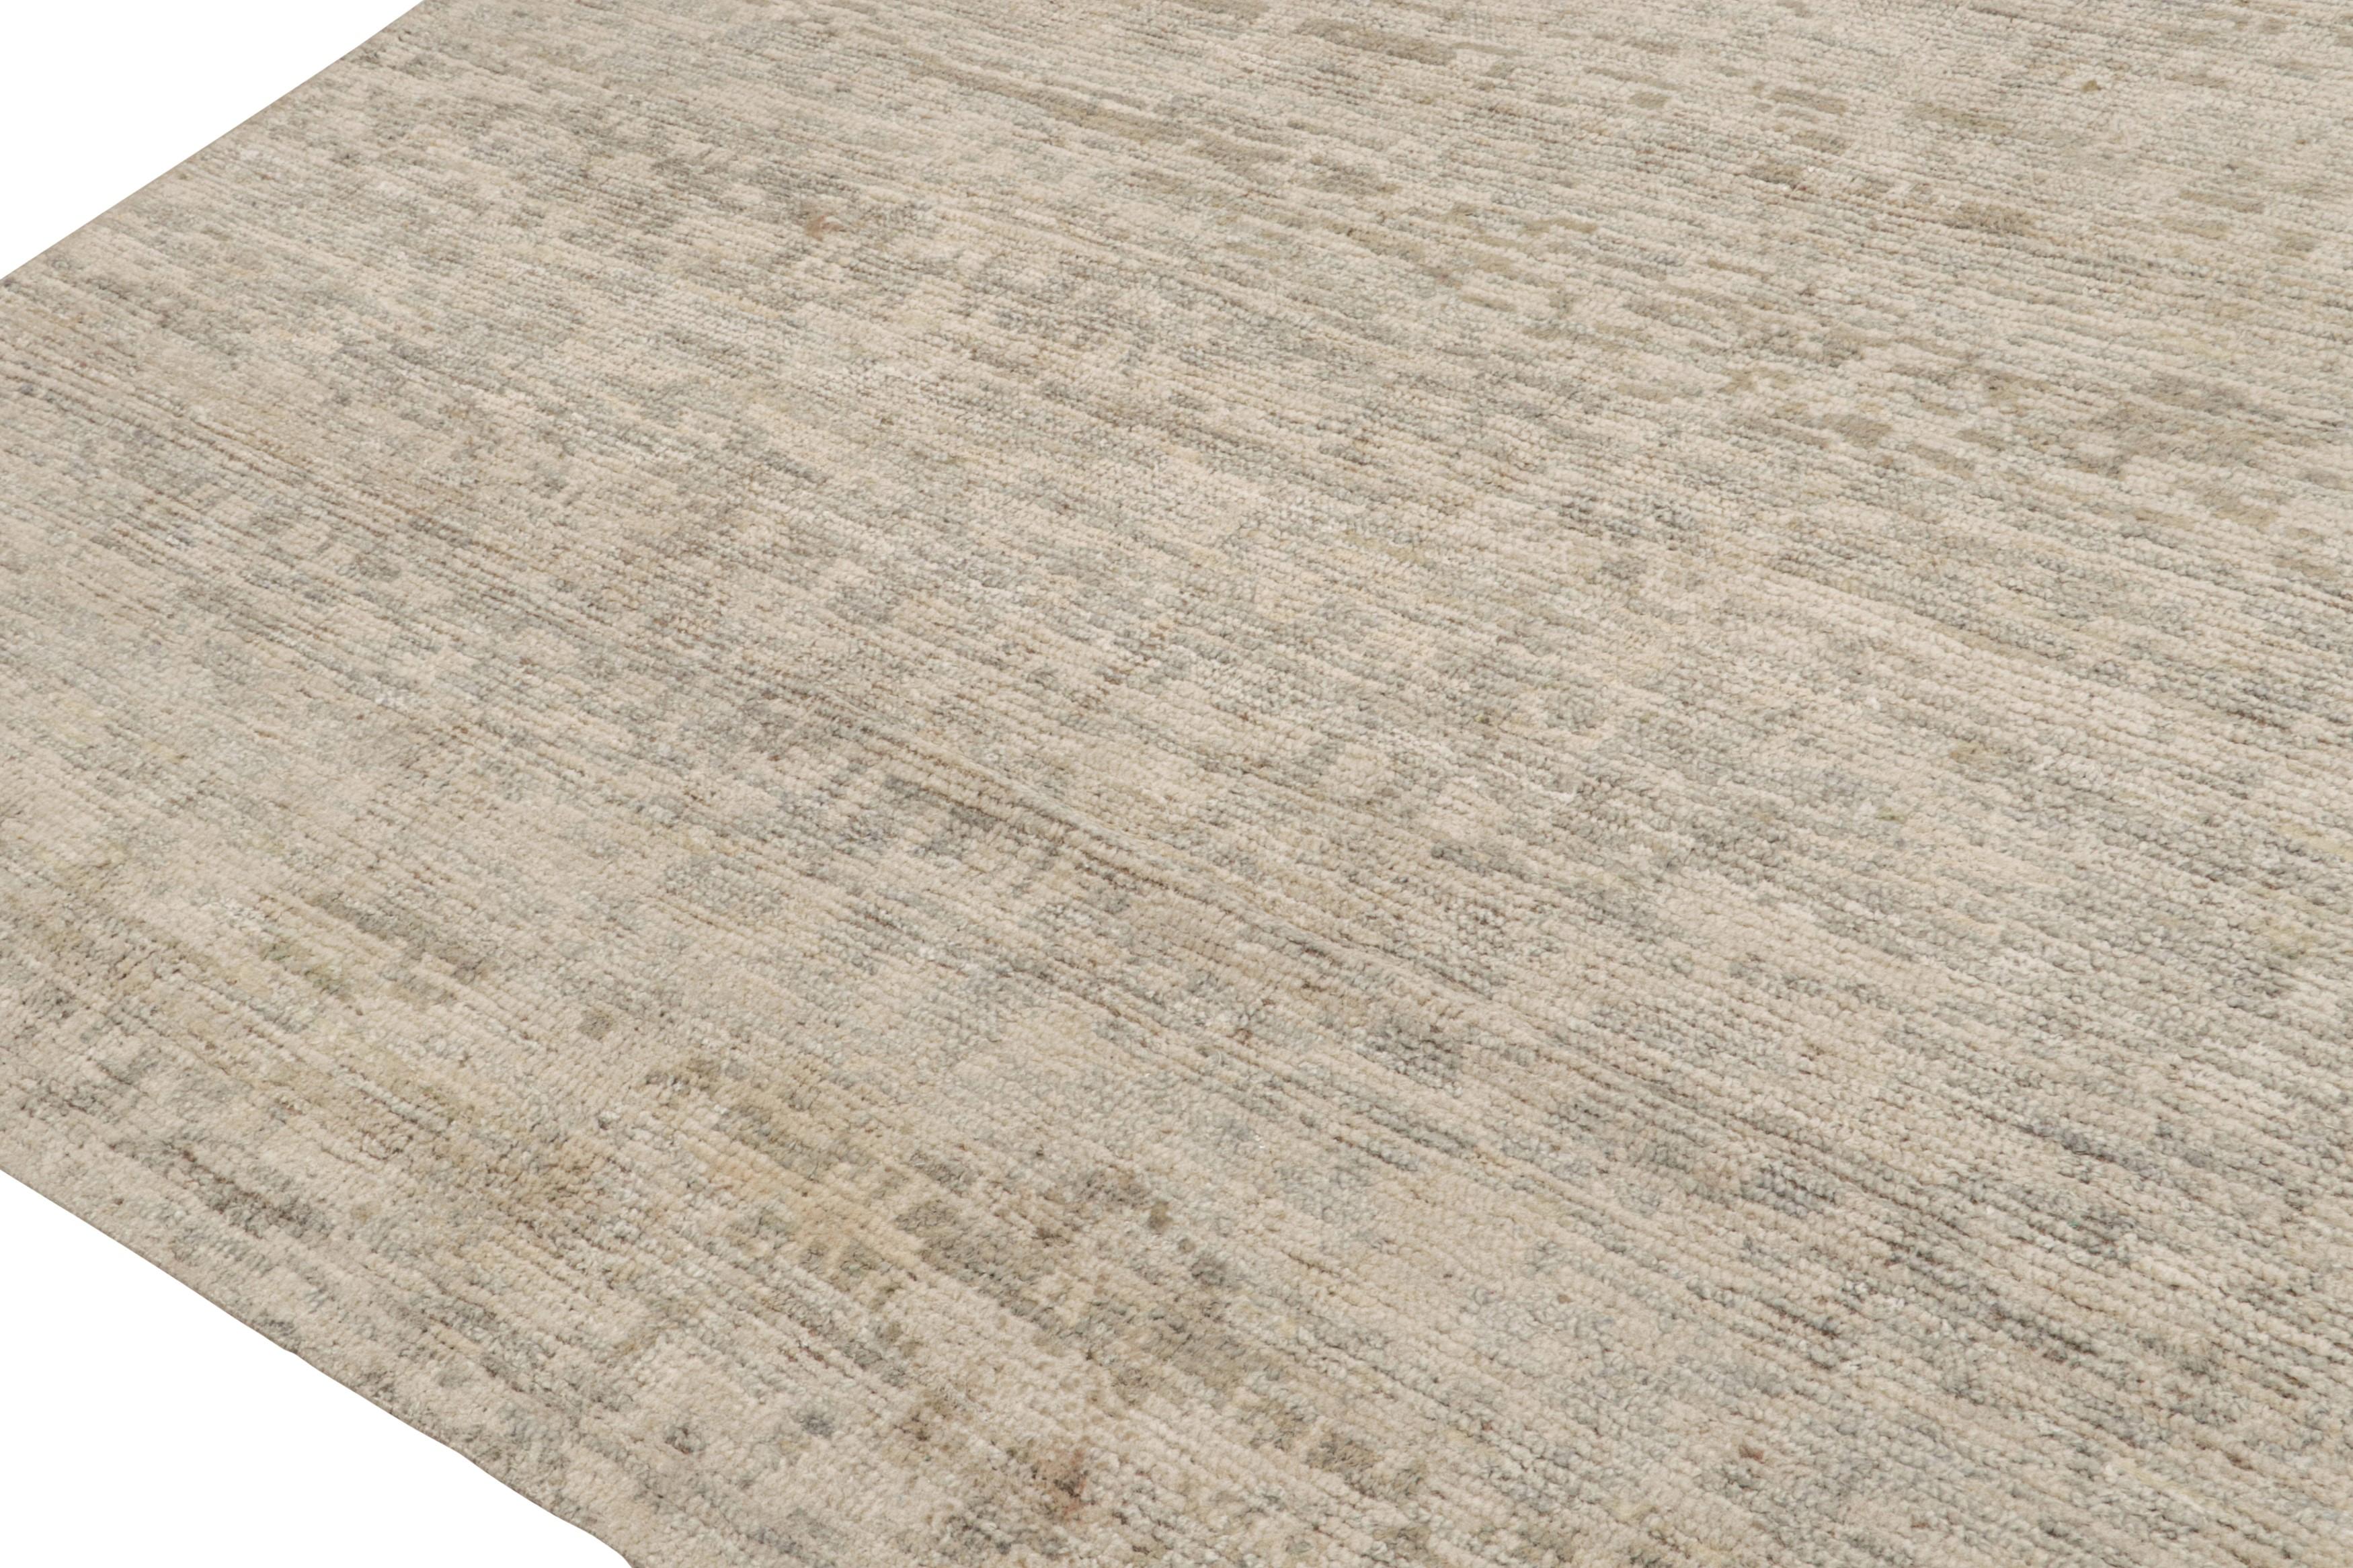  Rug & Kilim’s Contemporary Rug in Beige and Gray Tone-on-Tone Striae In New Condition For Sale In Long Island City, NY